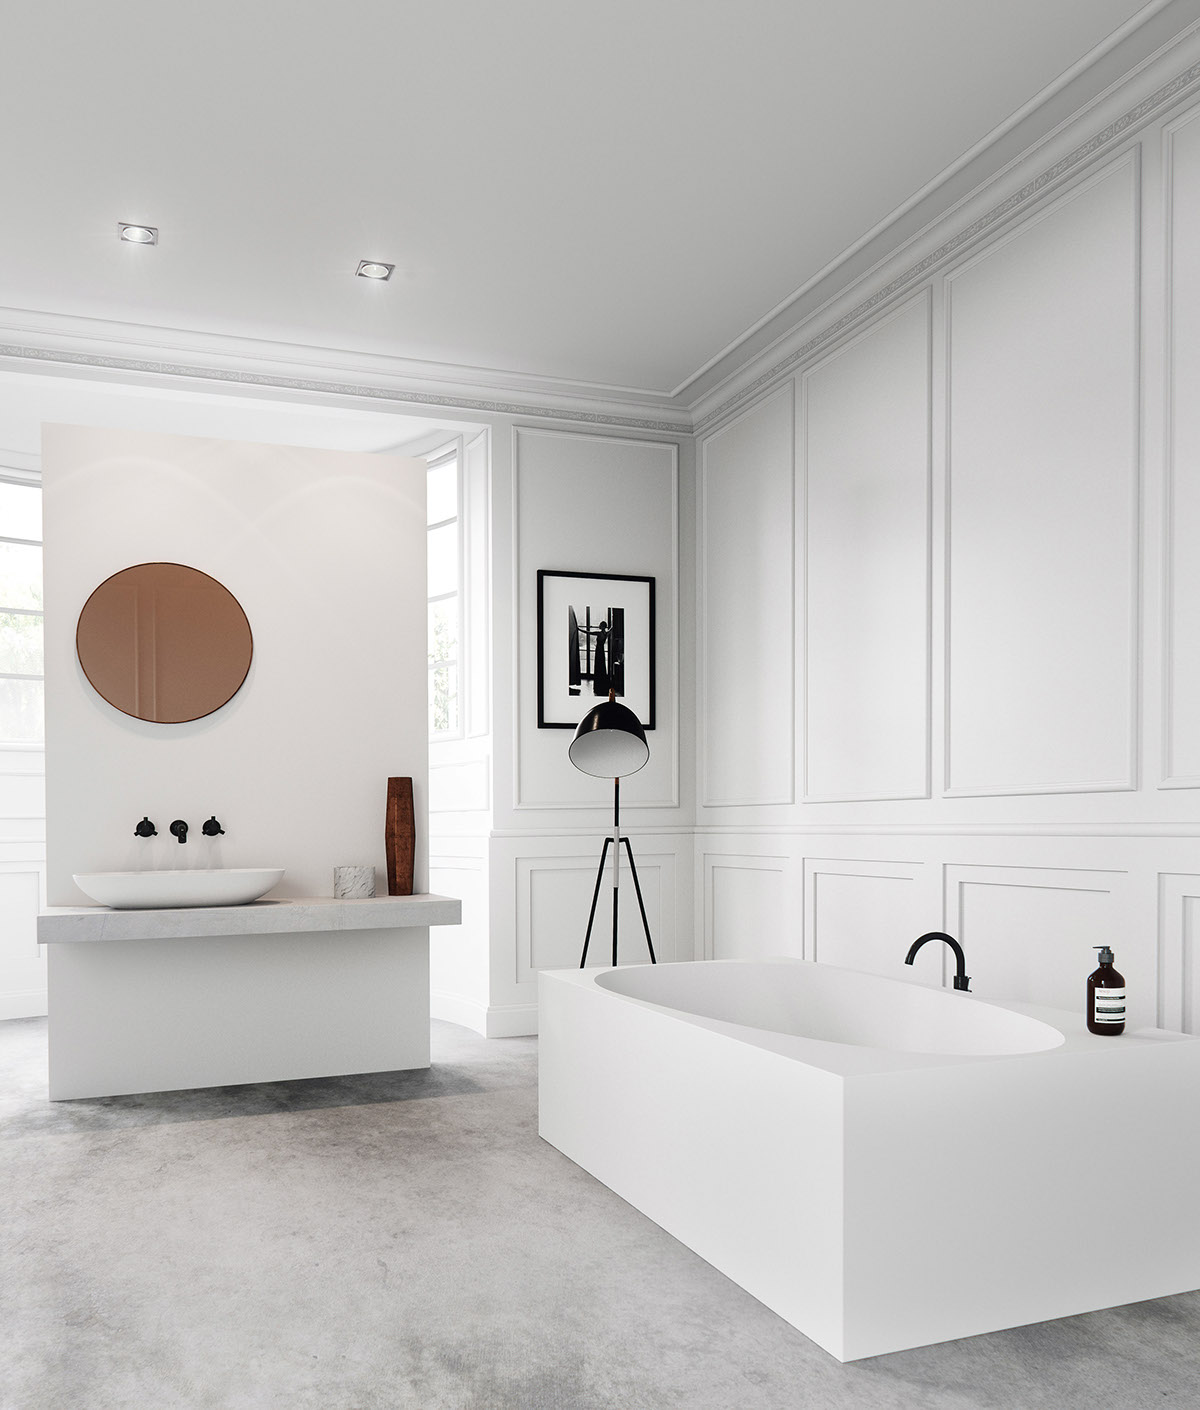 white modern small bathroom design "width =" 1200 "height =" 1410 "srcset =" https://mileray.com/wp-content/uploads/2020/05/1588515783_737_Modern-Bathroom-Design-Ideas-Completed-With-Perfect-Bathtubs-and-Awesome.jpg 1200w, https: / /mileray.com/wp-content/uploads/2016/10/Image-Box-Studios-2-255x300.jpg 255w, https://mileray.com/wp-content/uploads/2016/10/Image-Box - Studios-2-768x902.jpg 768w, https://mileray.com/wp-content/uploads/2016/10/Image-Box-Studios-2-871x1024.jpg 871w, https://mileray.com/wp - content / uploads / 2016/10 / Image-Box-Studios-2-696x818.jpg 696w, https://mileray.com/wp-content/uploads/2016/10/Image-Box-Studios-2-1068x1255. jpg 1068w, https://mileray.com/wp-content/uploads/2016/10/Image-Box-Studios-2-357x420.jpg 357w "sizes =" (maximum width: 1200px) 100vw, 1200px